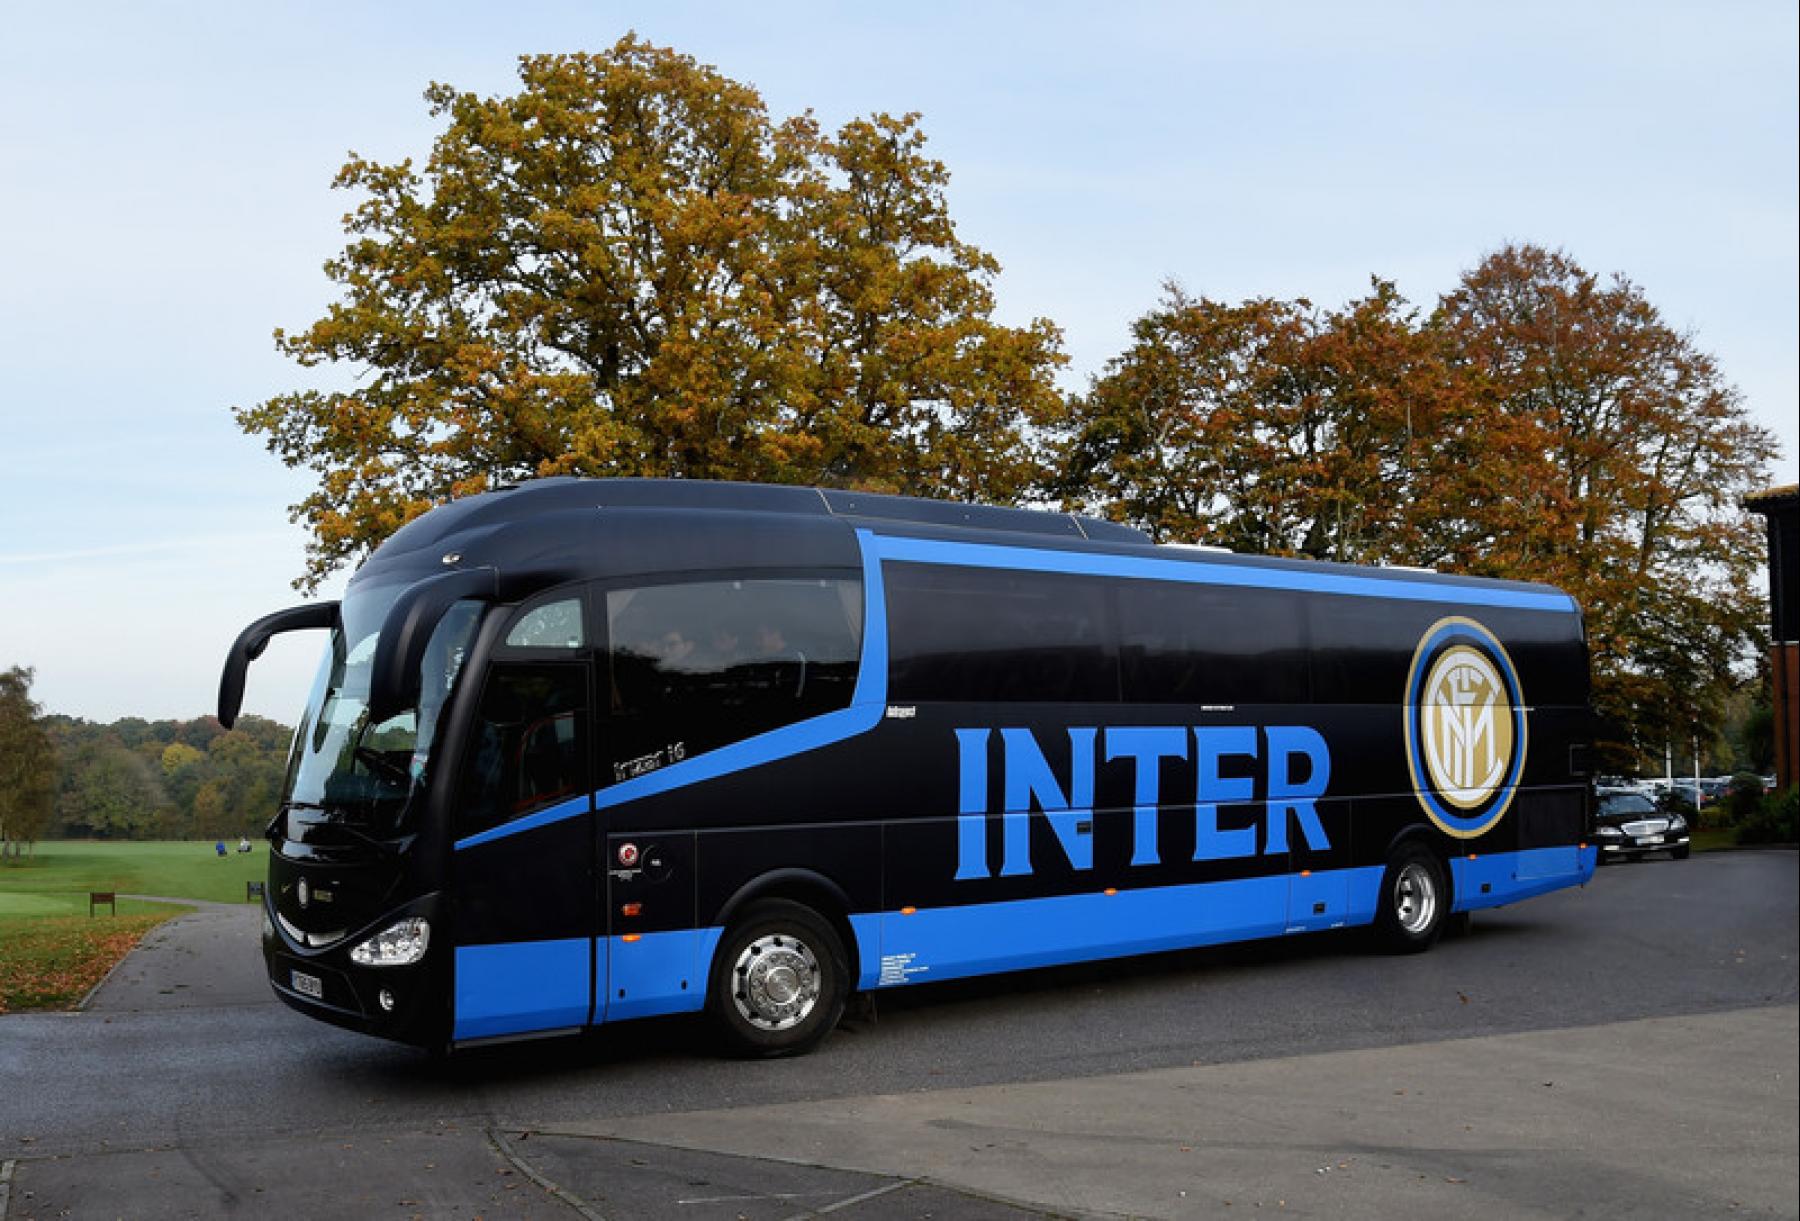 Full colour printed wrap for Inter Milan's team bus